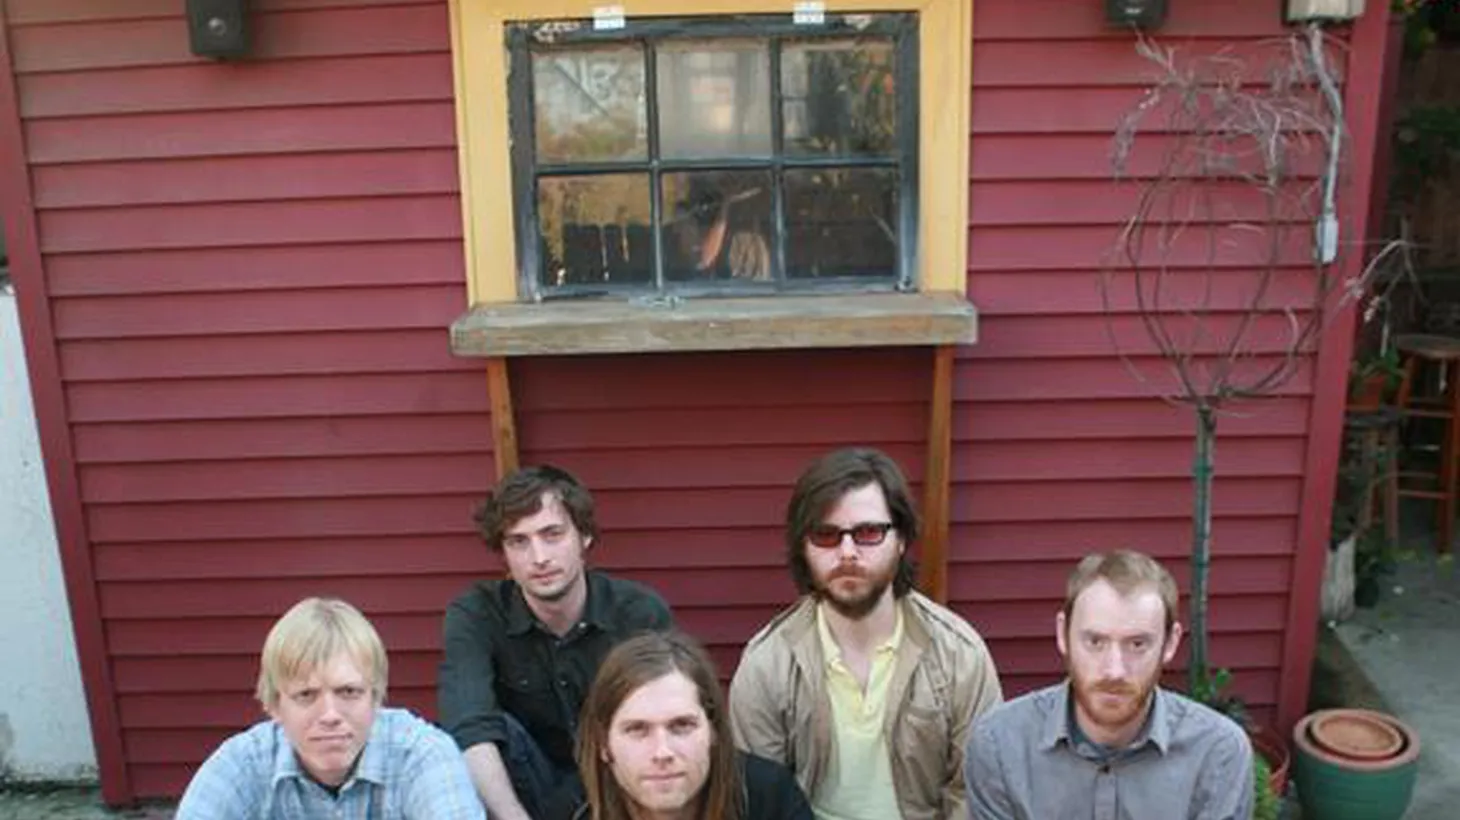 Reformed and renewed, The Fruit Bats return to perform cheery folk-pop songs from their latest release, The Ruminant Band, on Morning Becomes Eclectic at 11:15am.